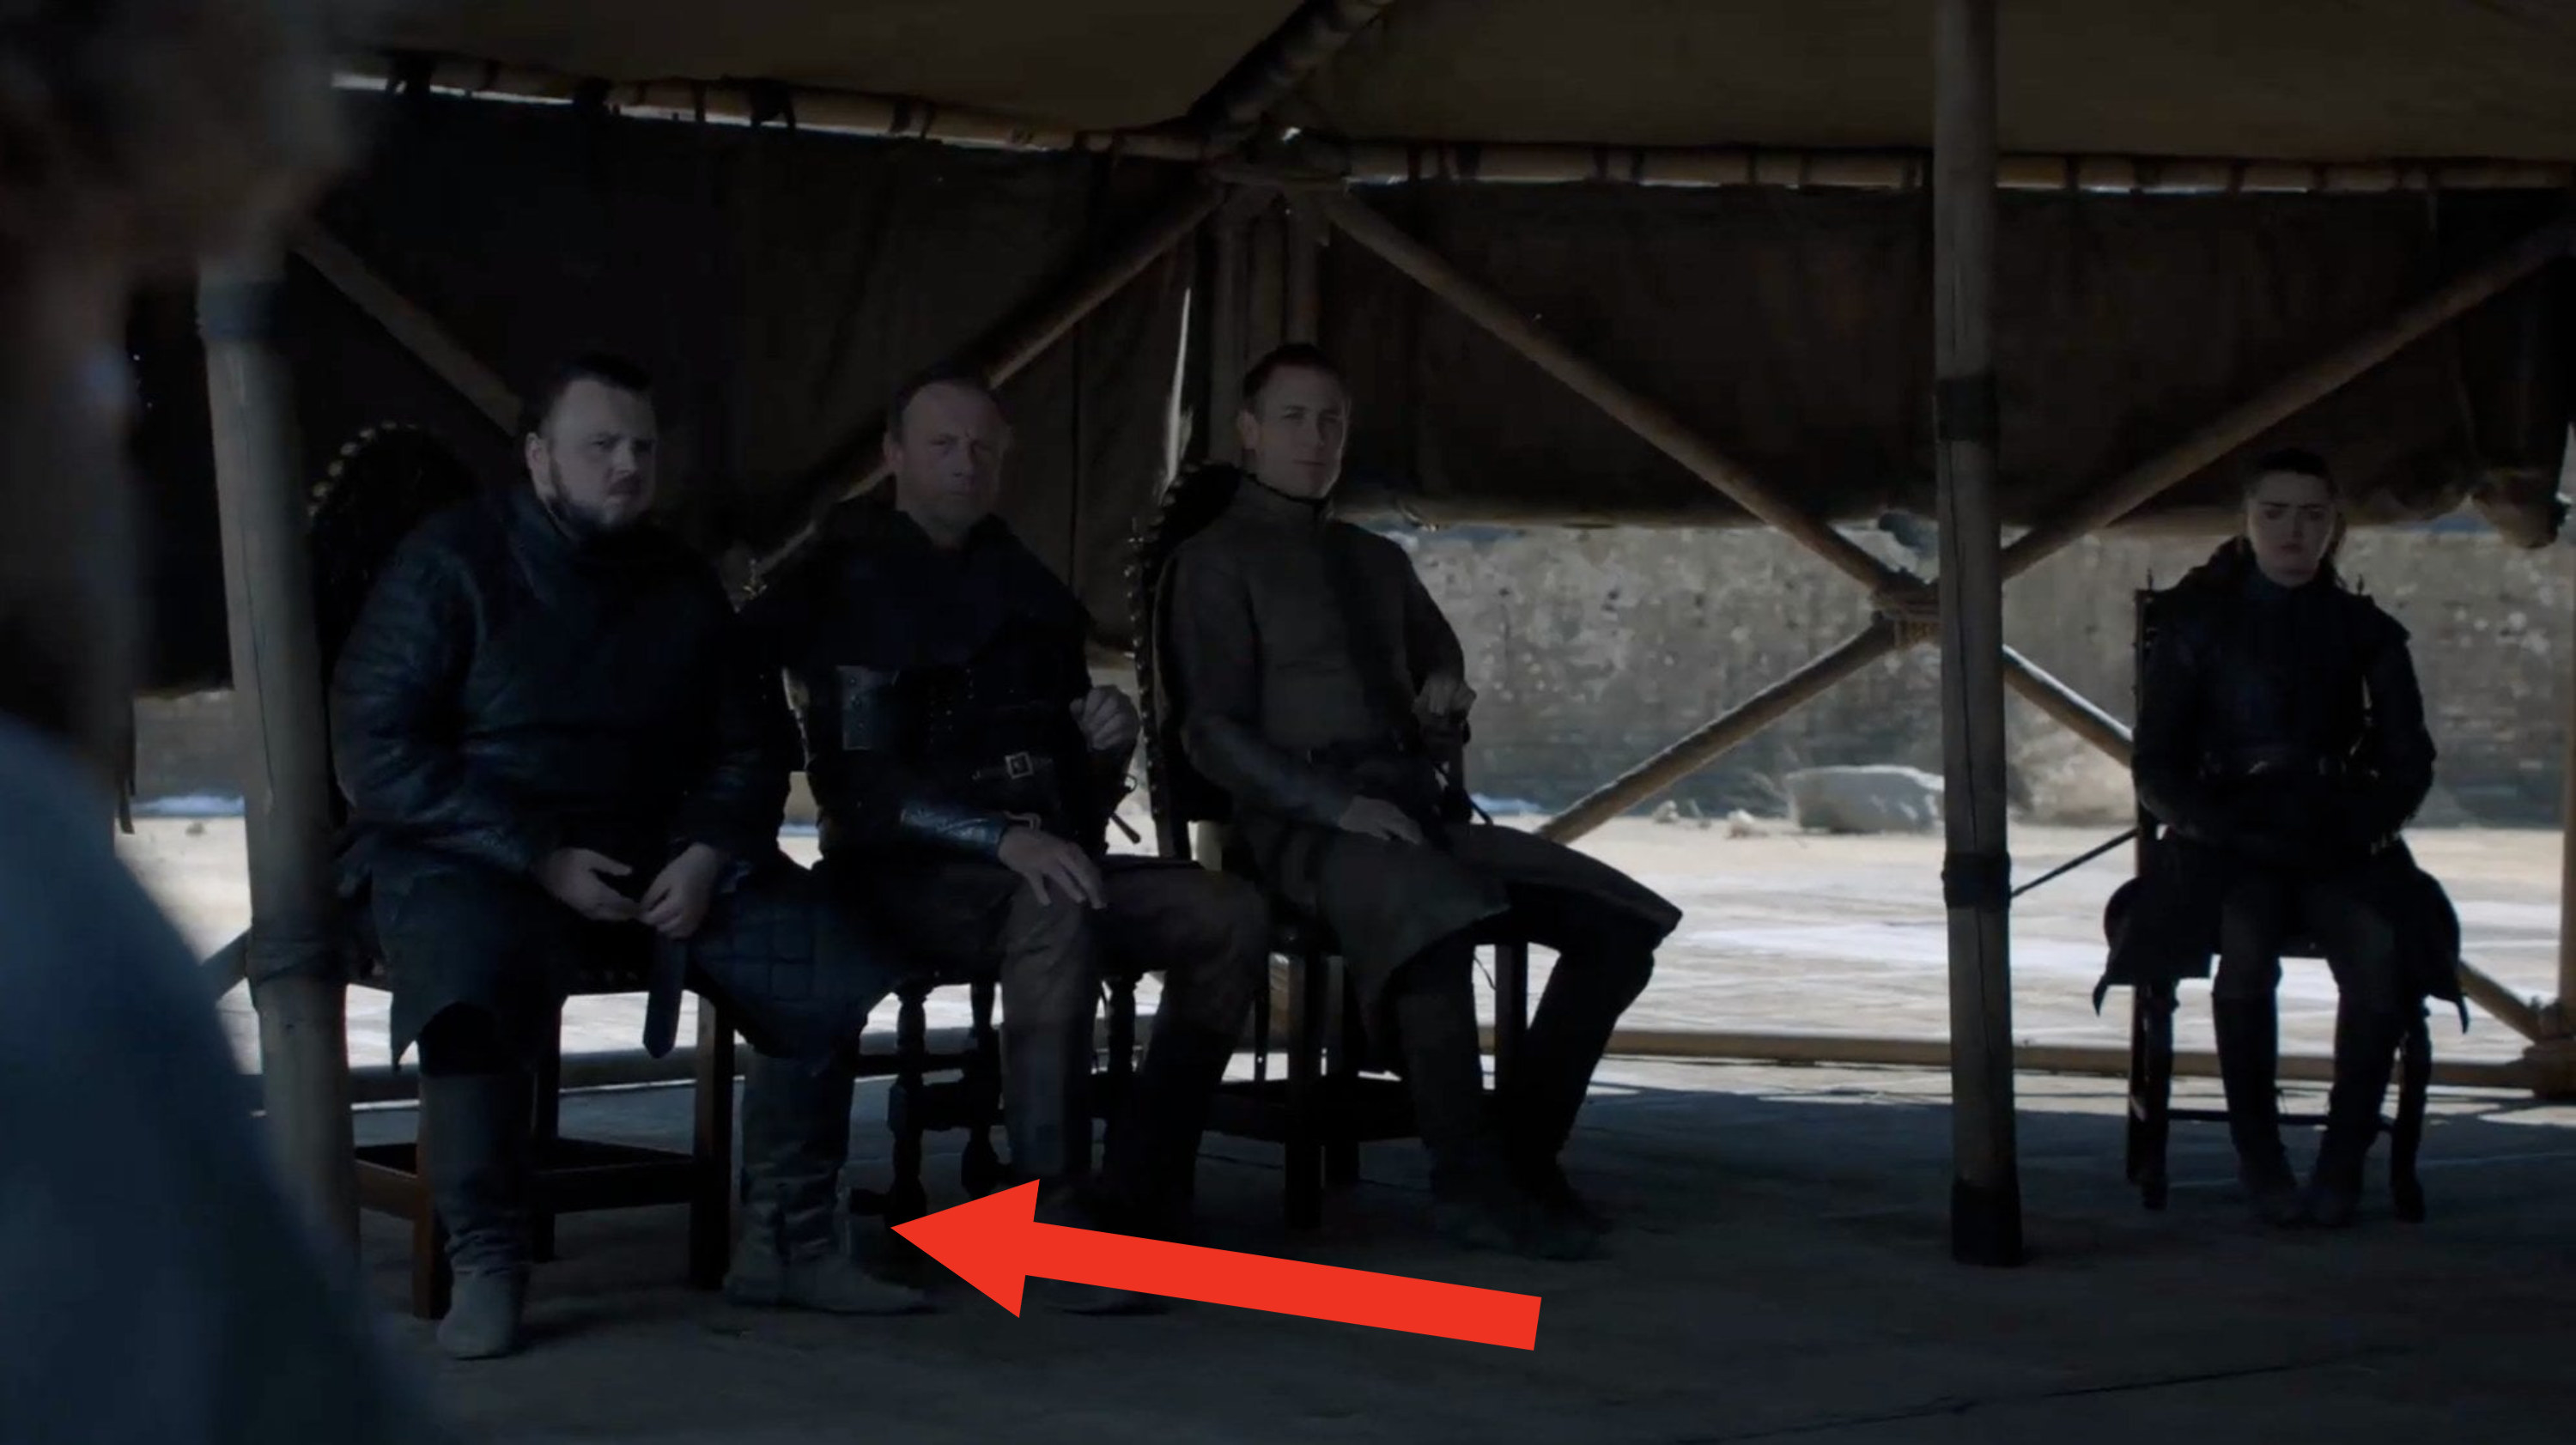 A shot from Game of Thrones with a water bottle barely in frame